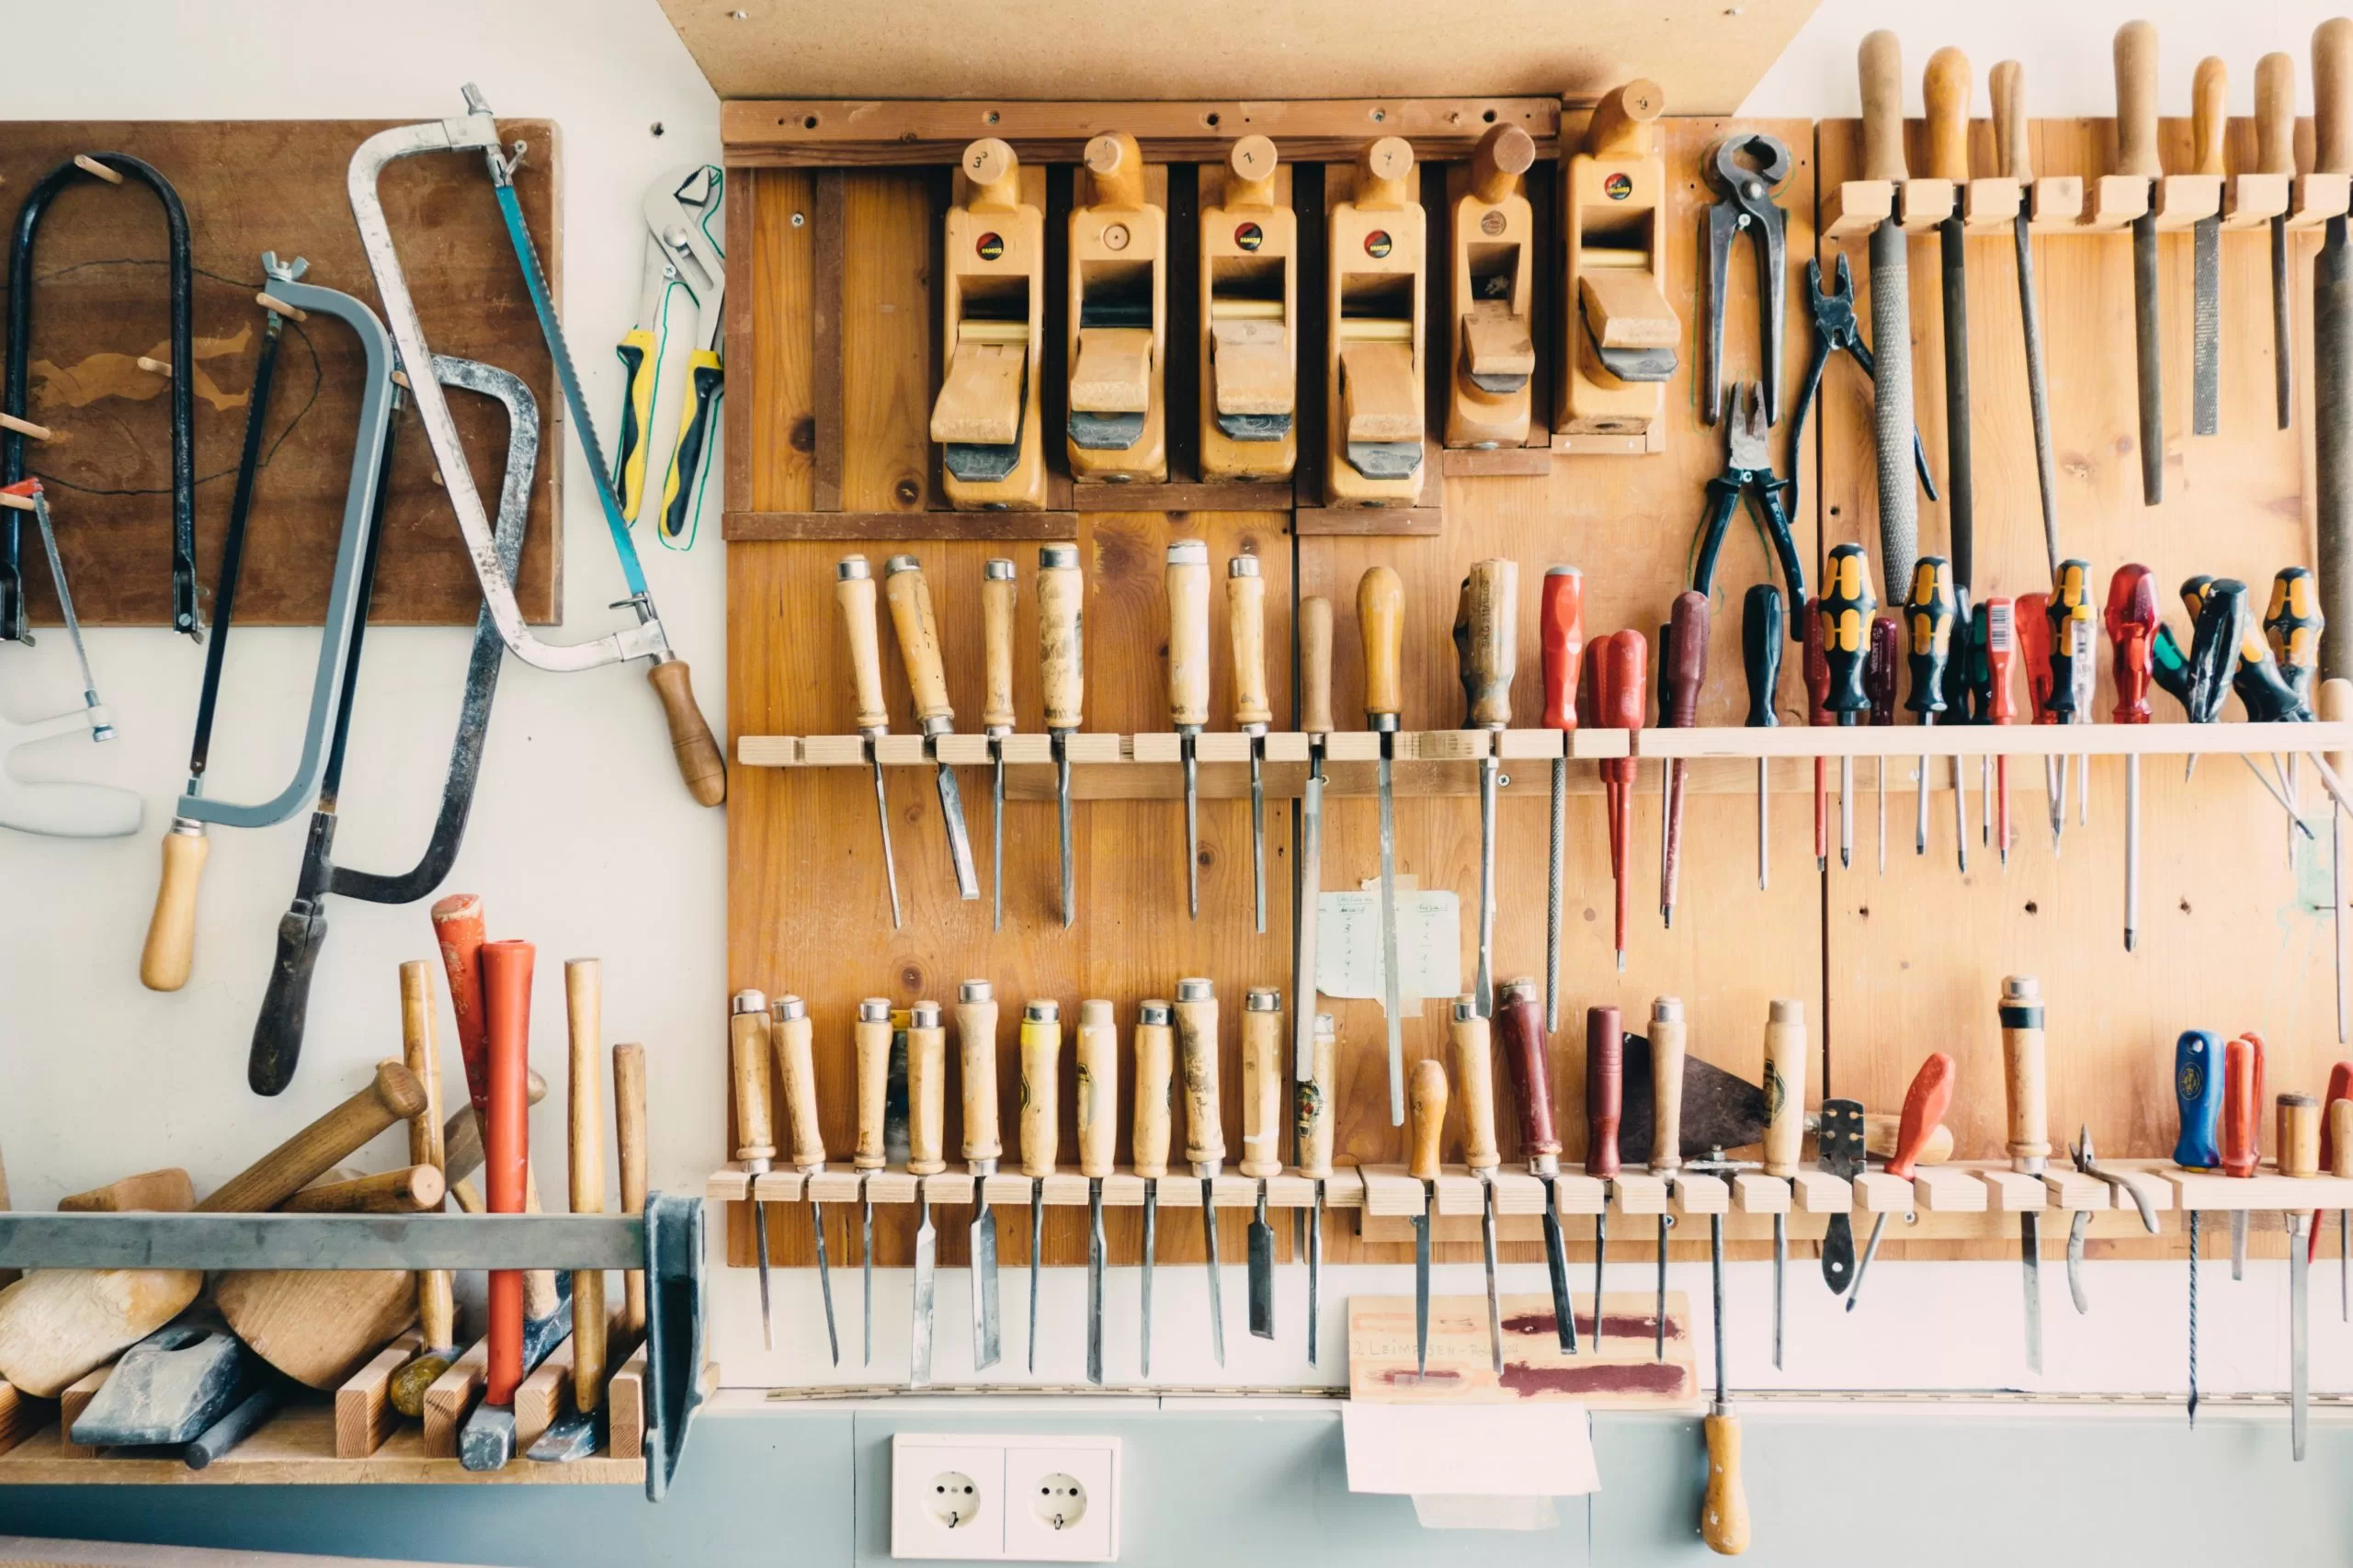 A workbench in front of a tool rack on the wall with saws and chisels